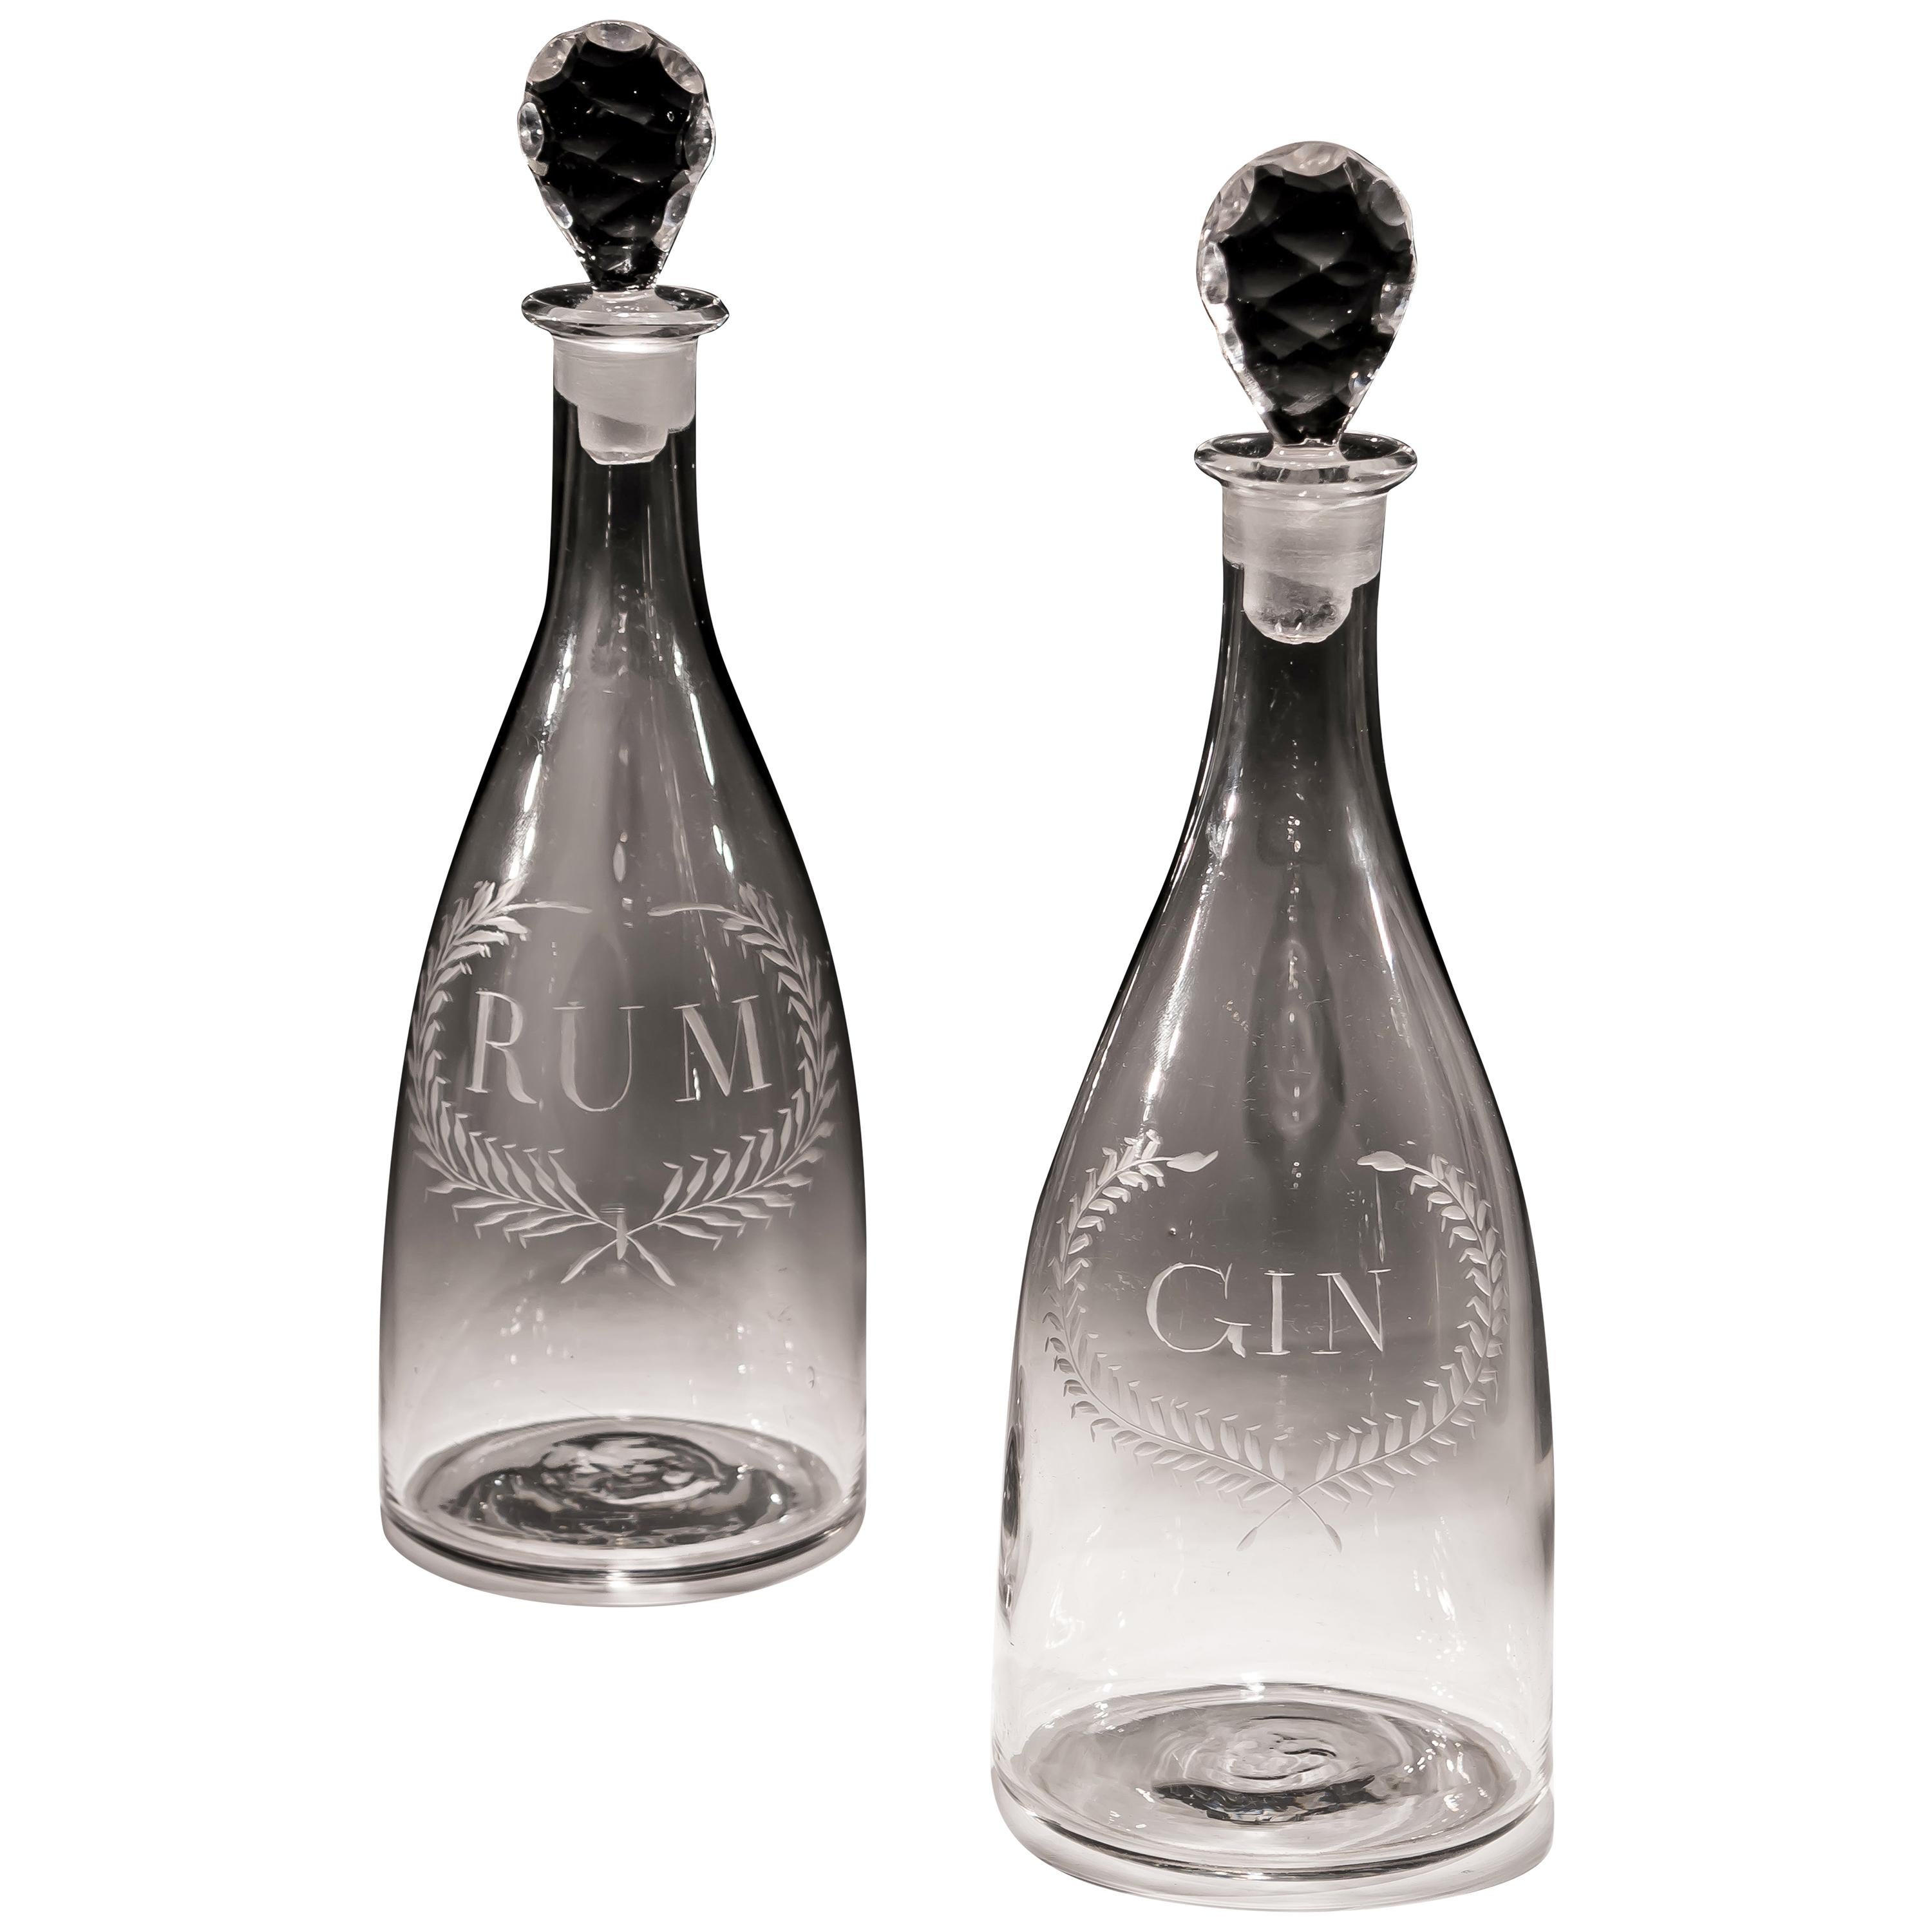 Finely Engraved Pair of Labelled Gin And Rum Tapered Georgian Decanters